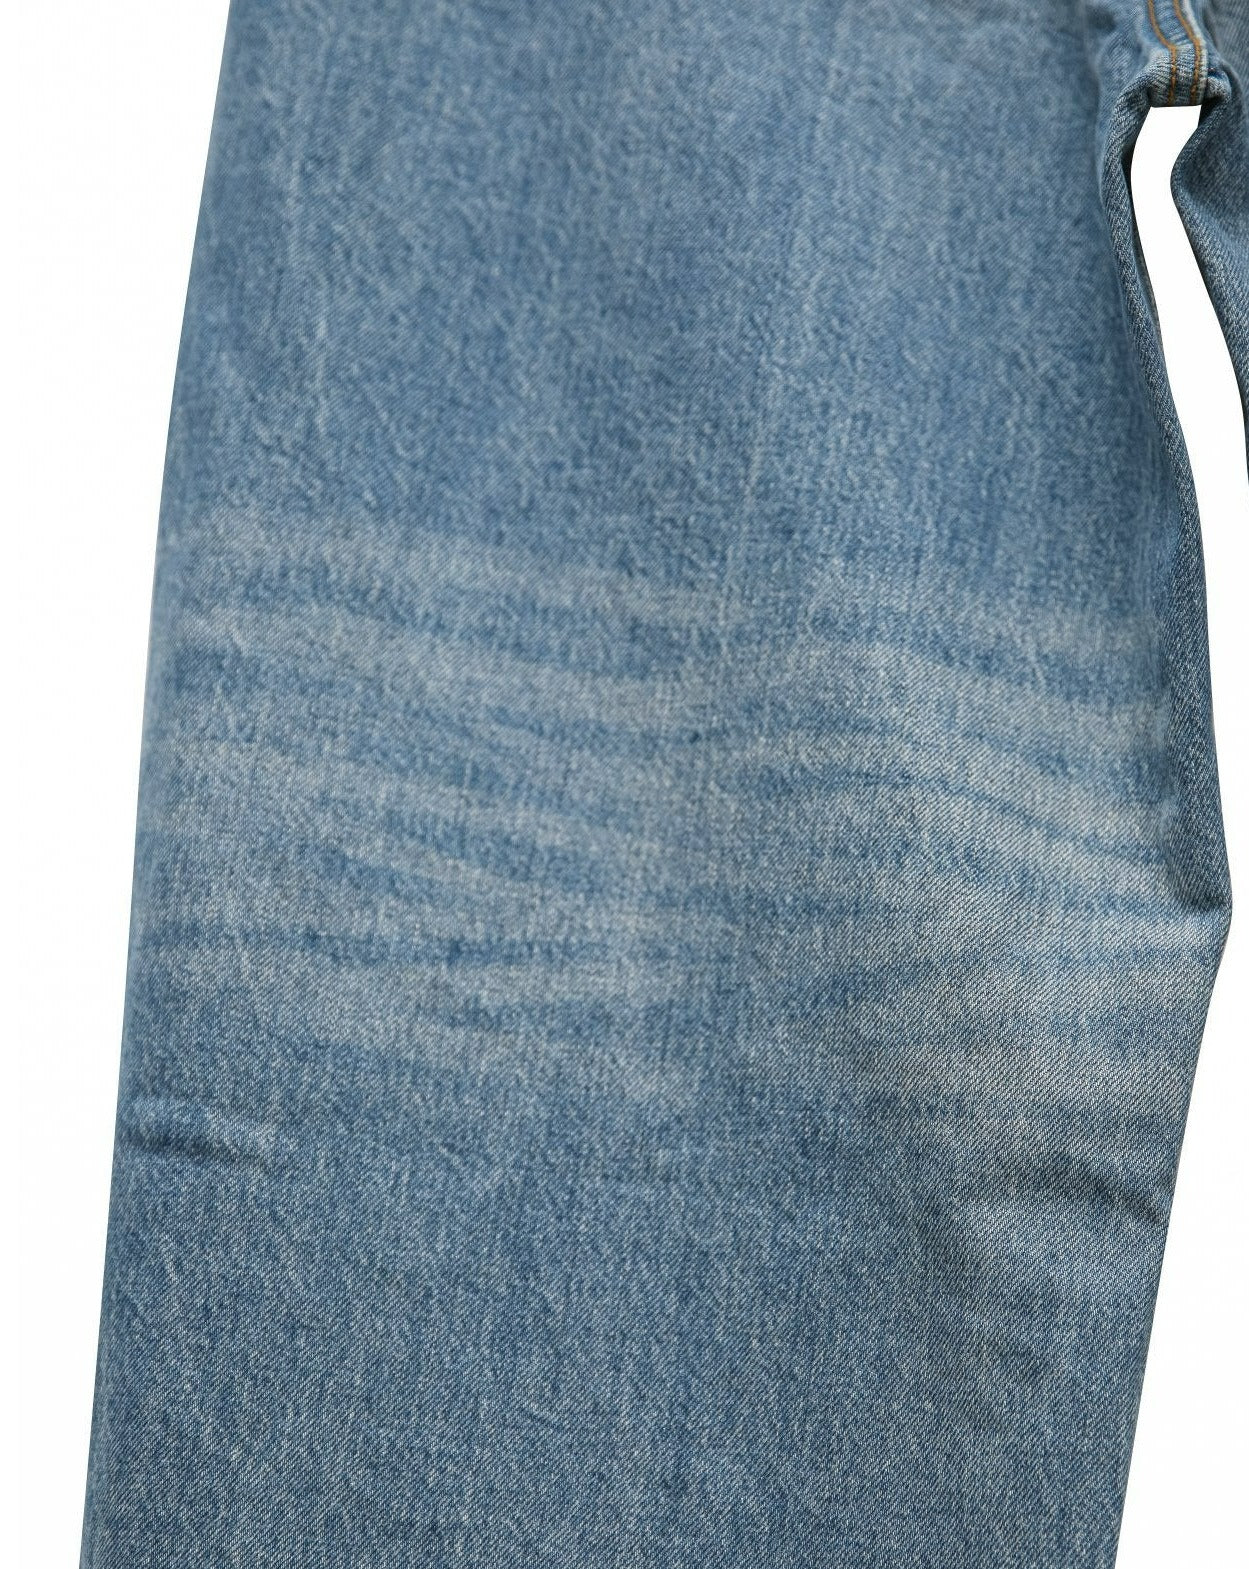 【PAPERMOON ペーパームーン】SS / Vintage Blue Distressed Damage Wash Wide-Leg Jeans